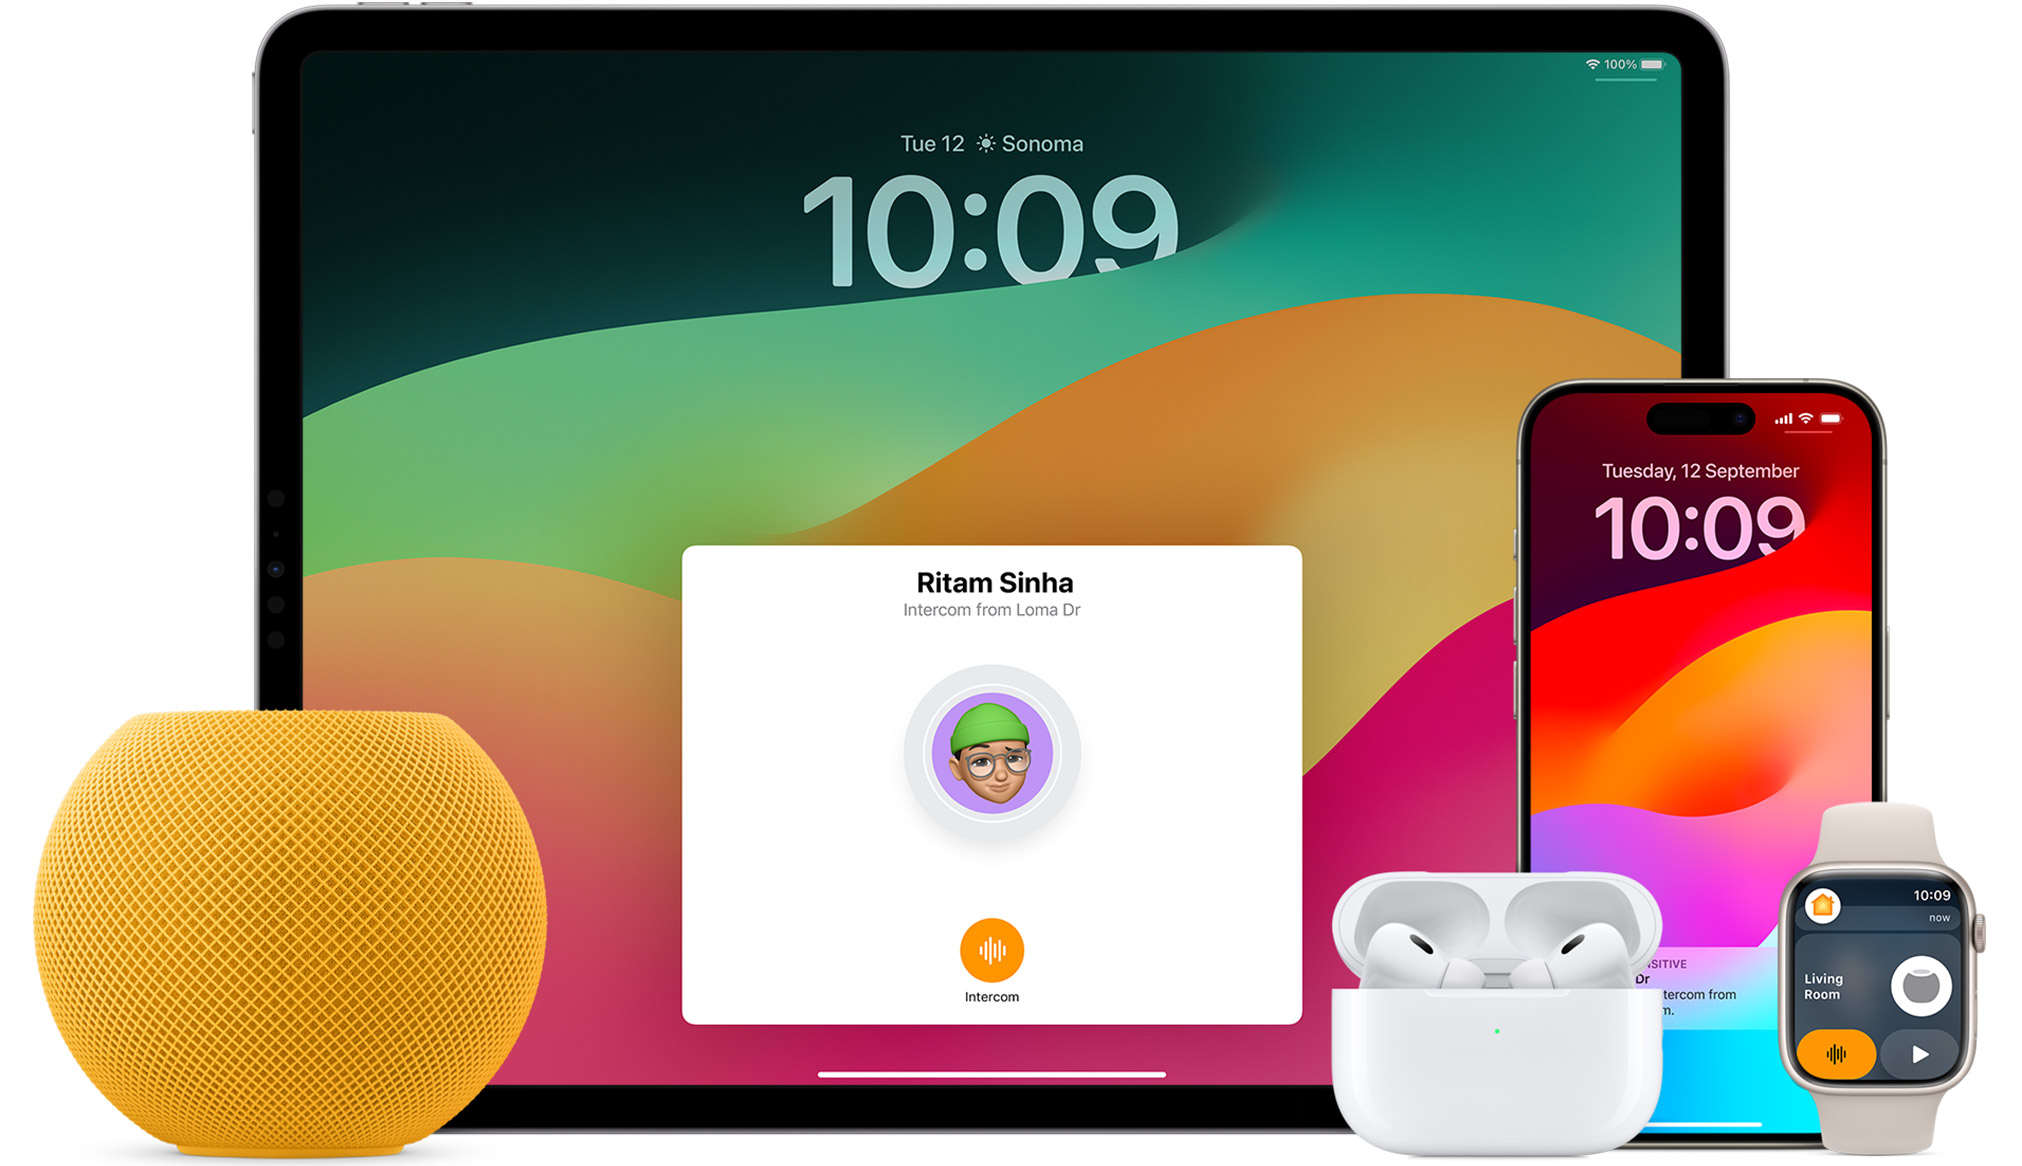 White HomePod mini, an iPad, AirPods in a case, an iPhone, and an Apple Watch with a pink band are arranged.